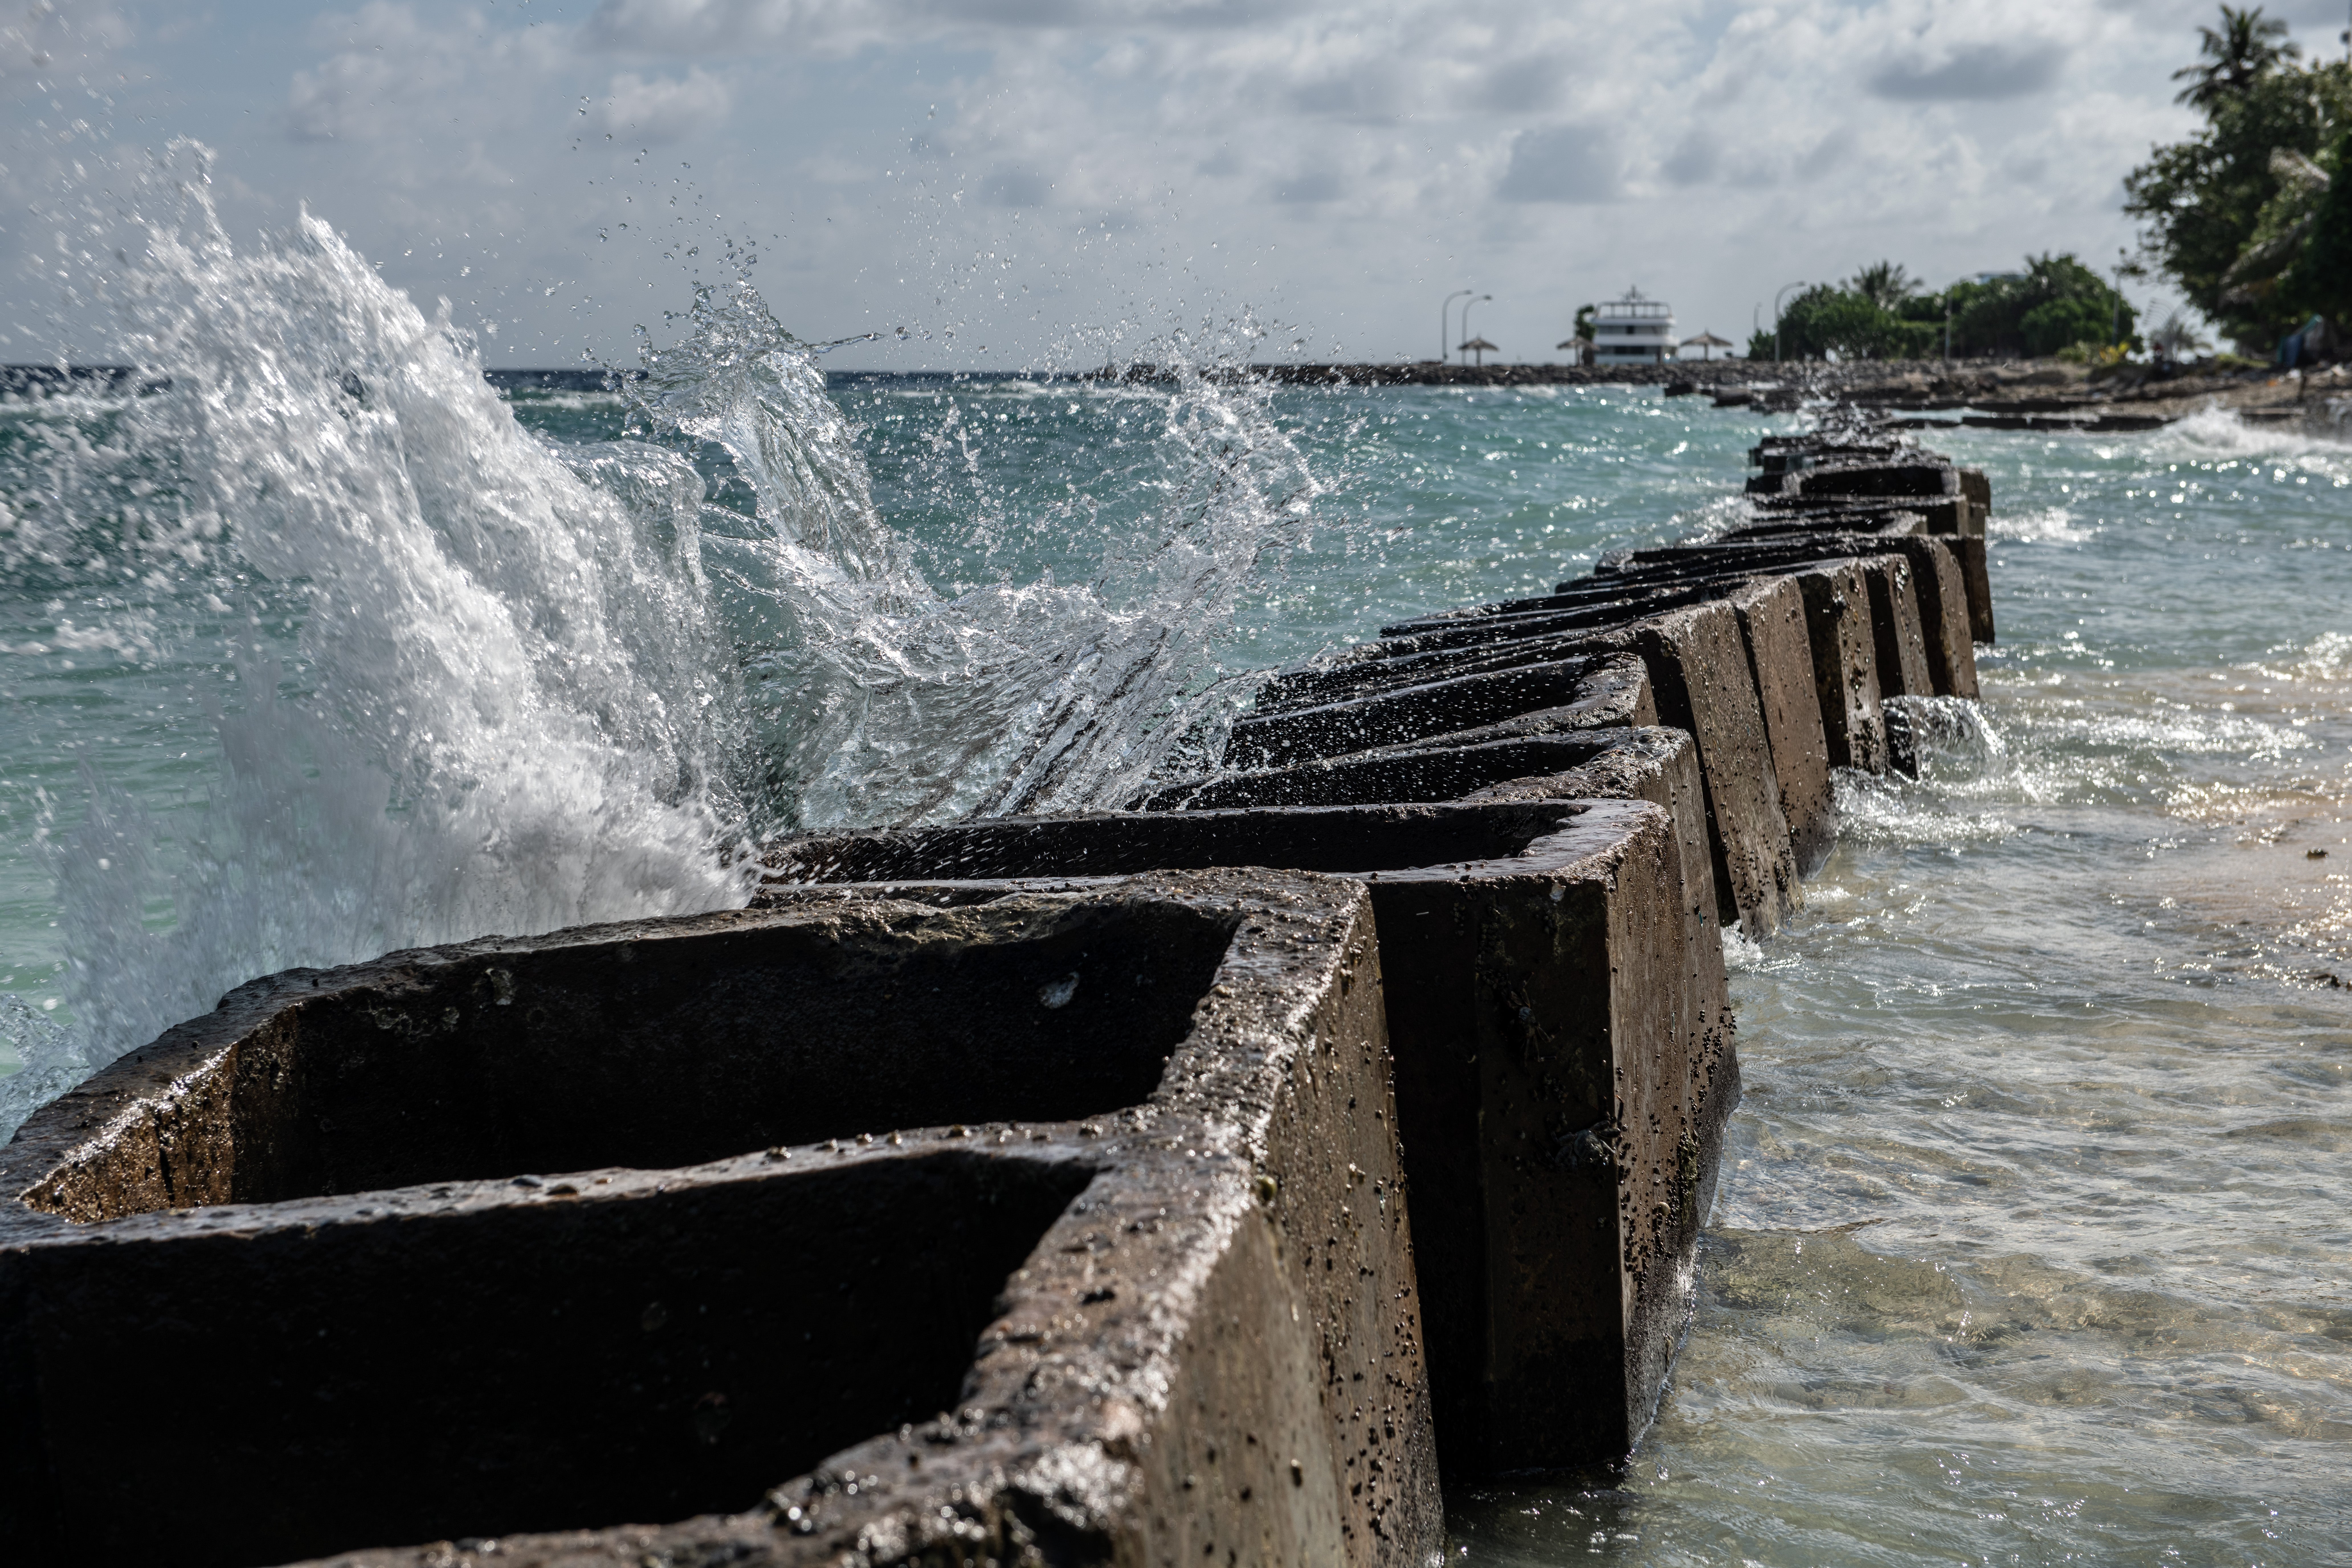 Concrete blocks have been put in place to prevent further coastal erosion in Mahibadhoo in the Maldives